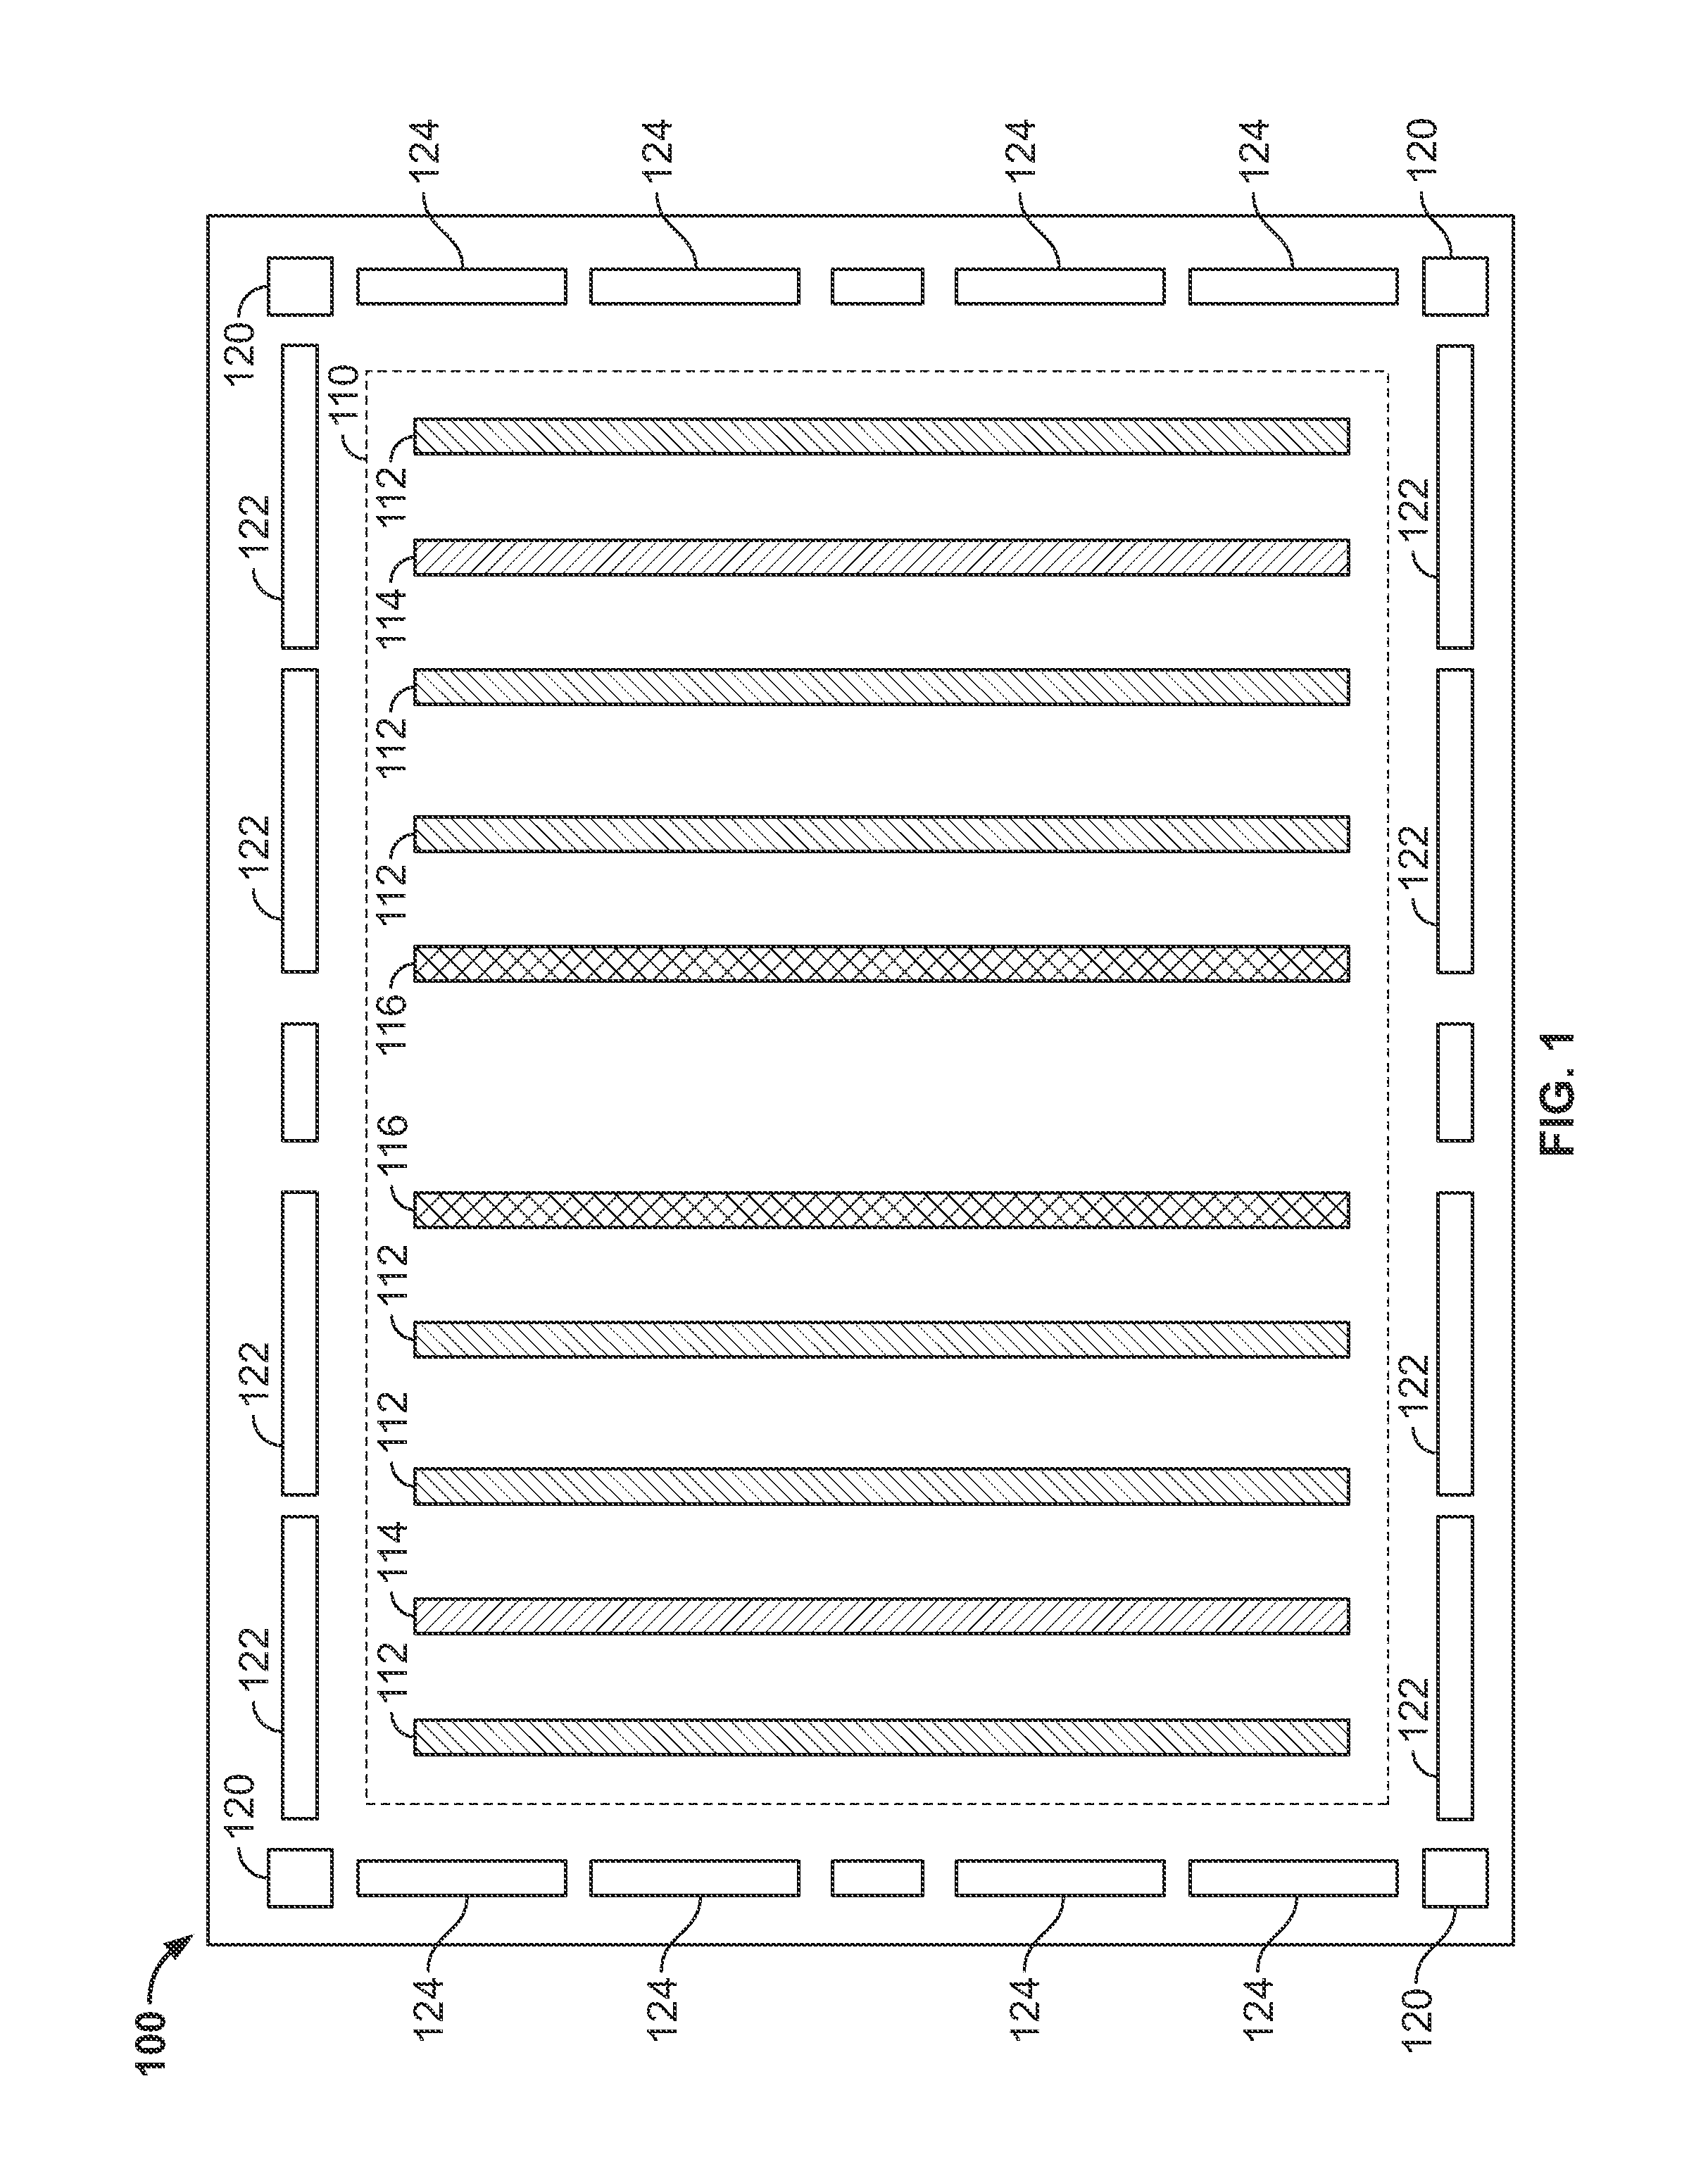 Programmable logic device with integrated network-on-chip